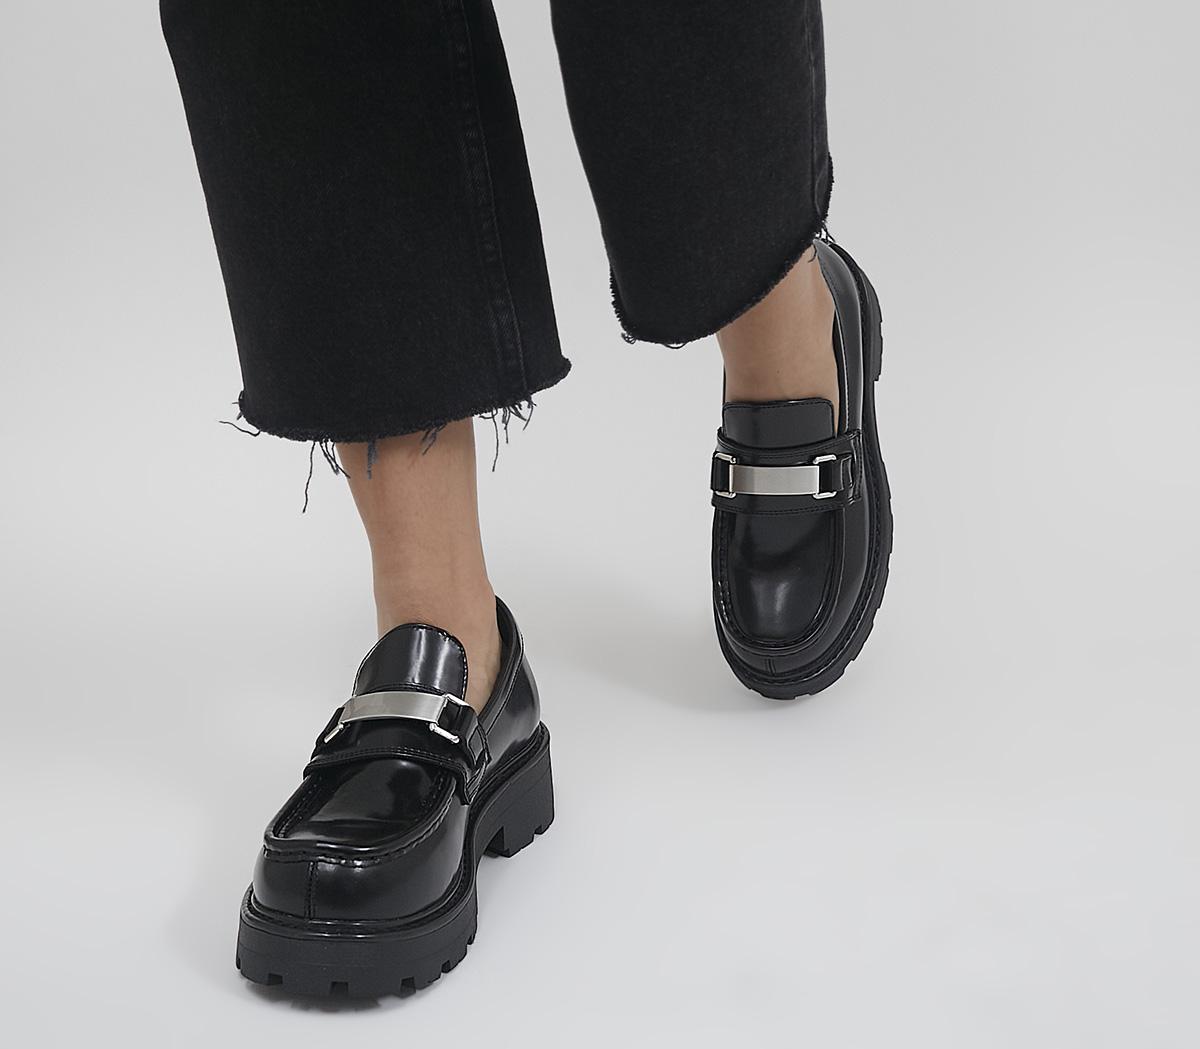 Womens Vagabond Shoemakers Cosmo 2.0 Buckle Loafer Black Polished